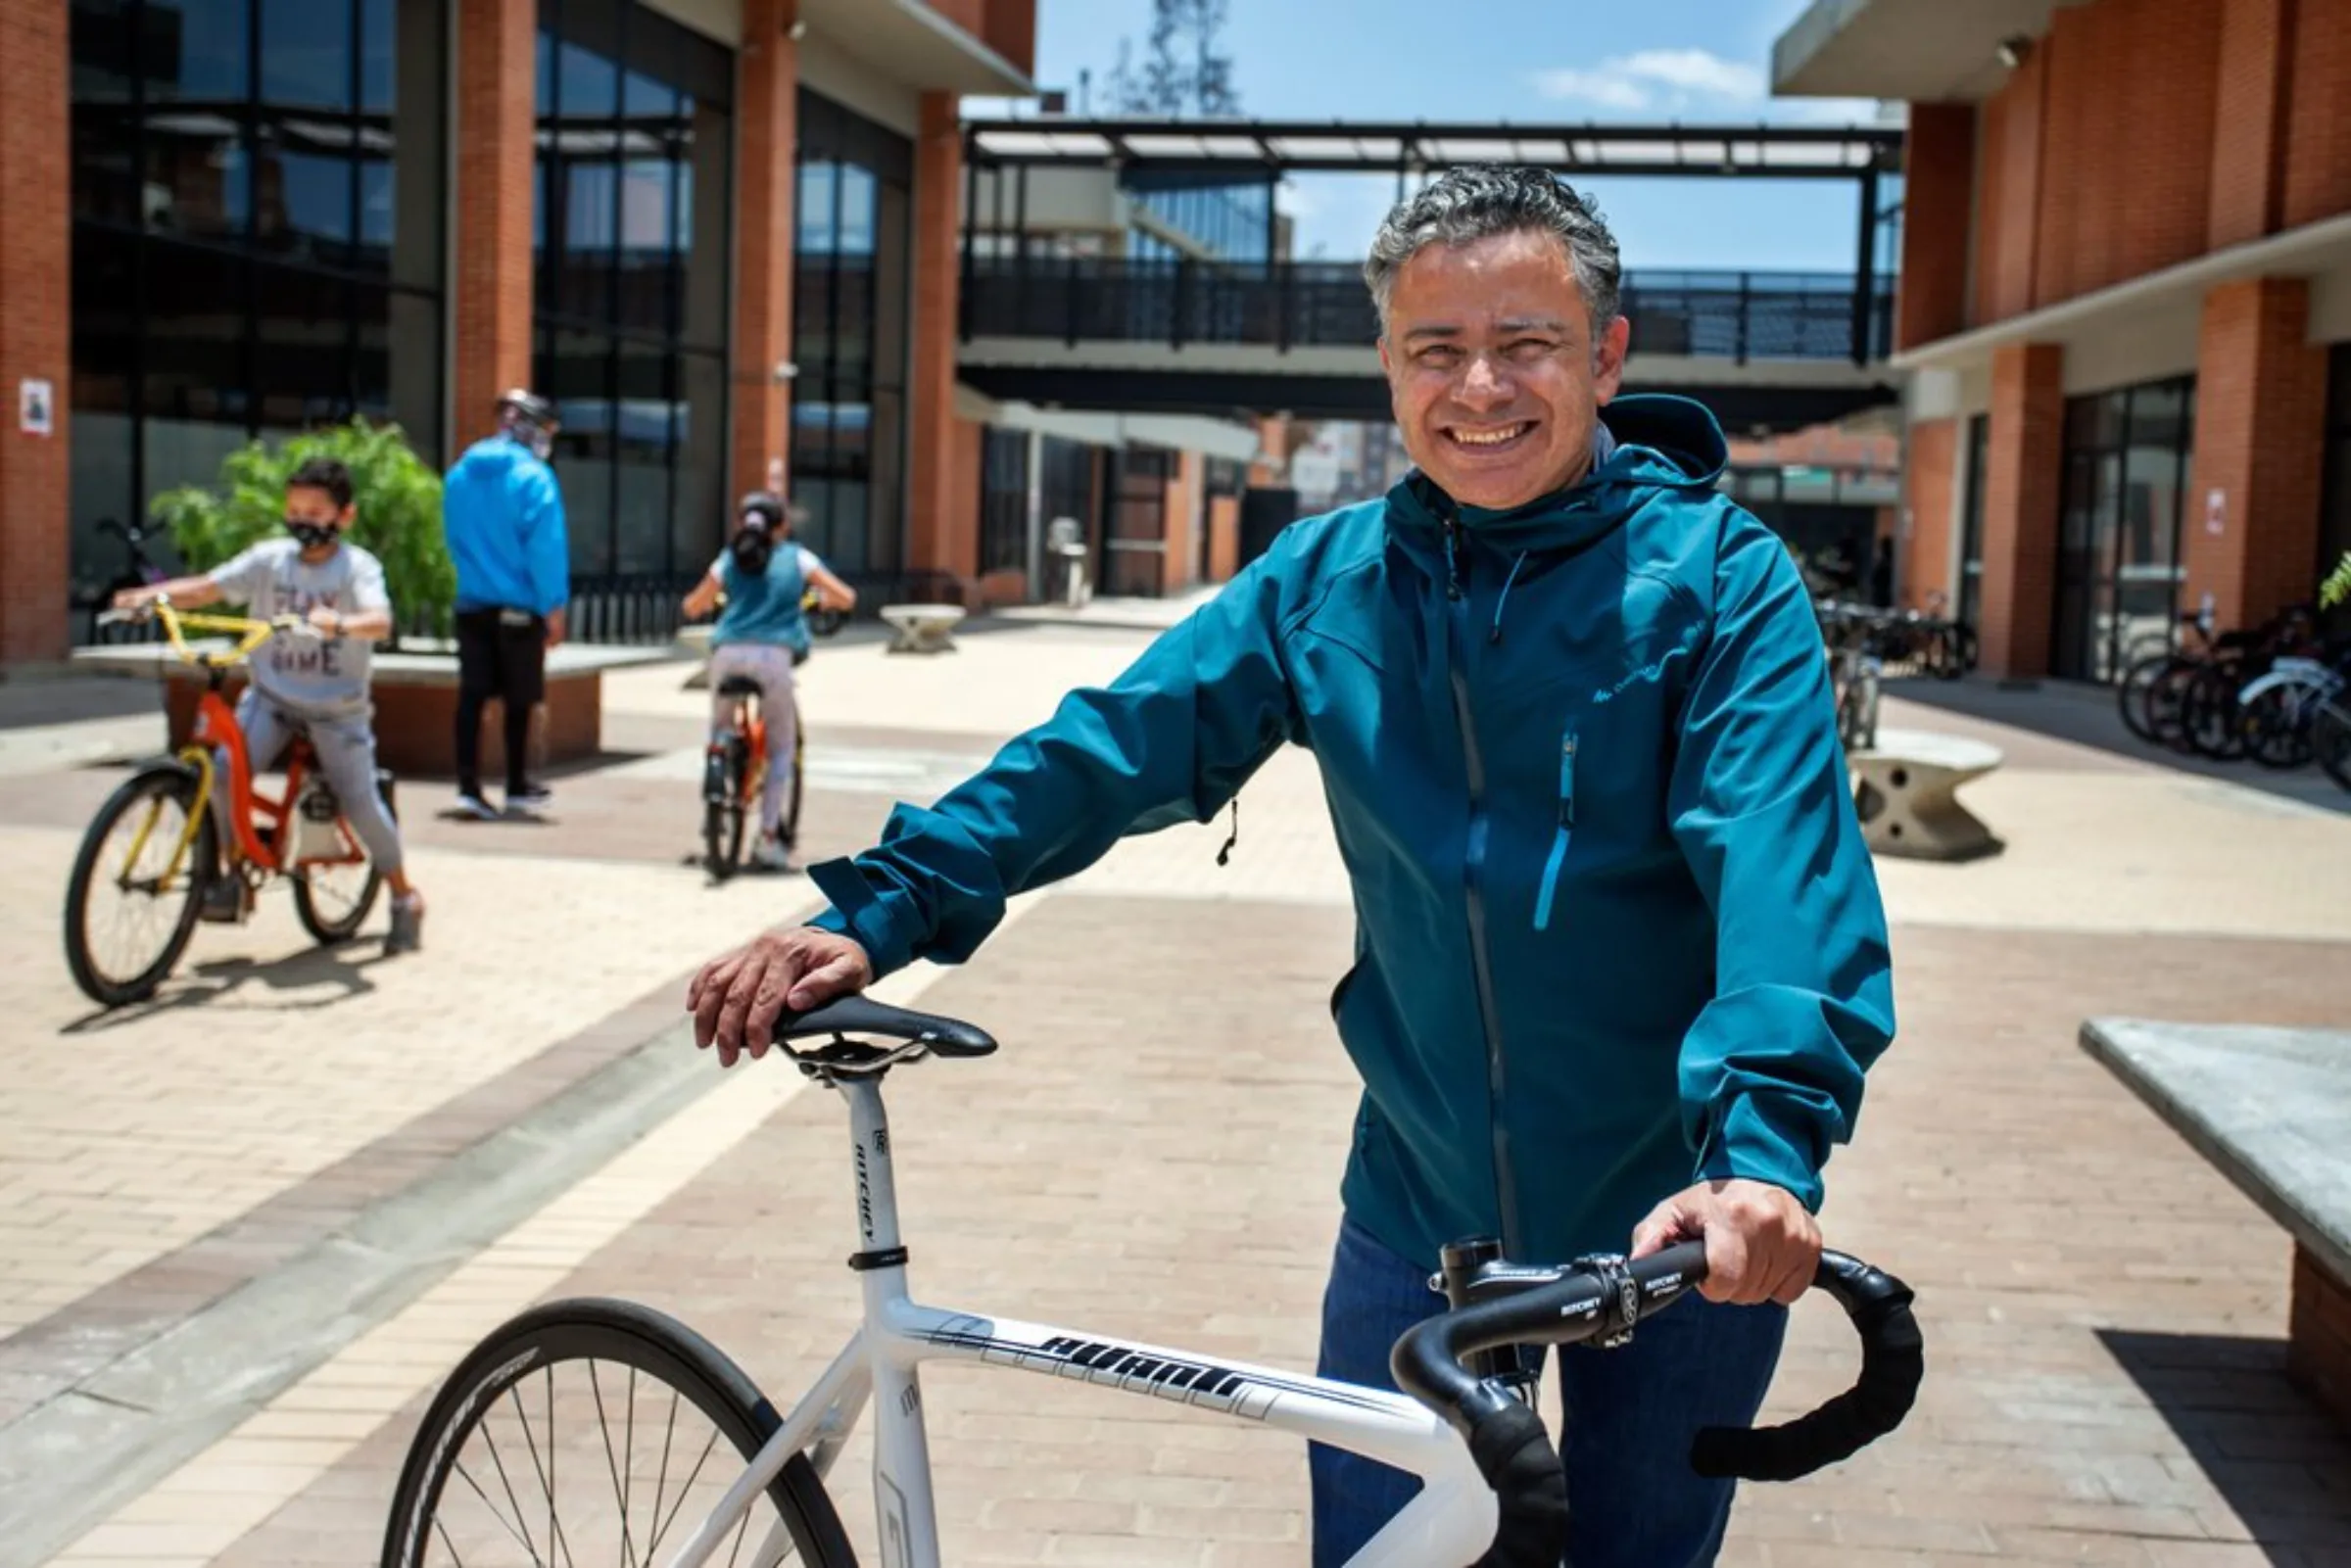 Jose Willington, headteacher at “The Bike College”, a new public school in the poor neighbourhood of Bosa, stands with his cycle as students practice riding behind him at the school in south Bogota, Colombia, April 22, 2021